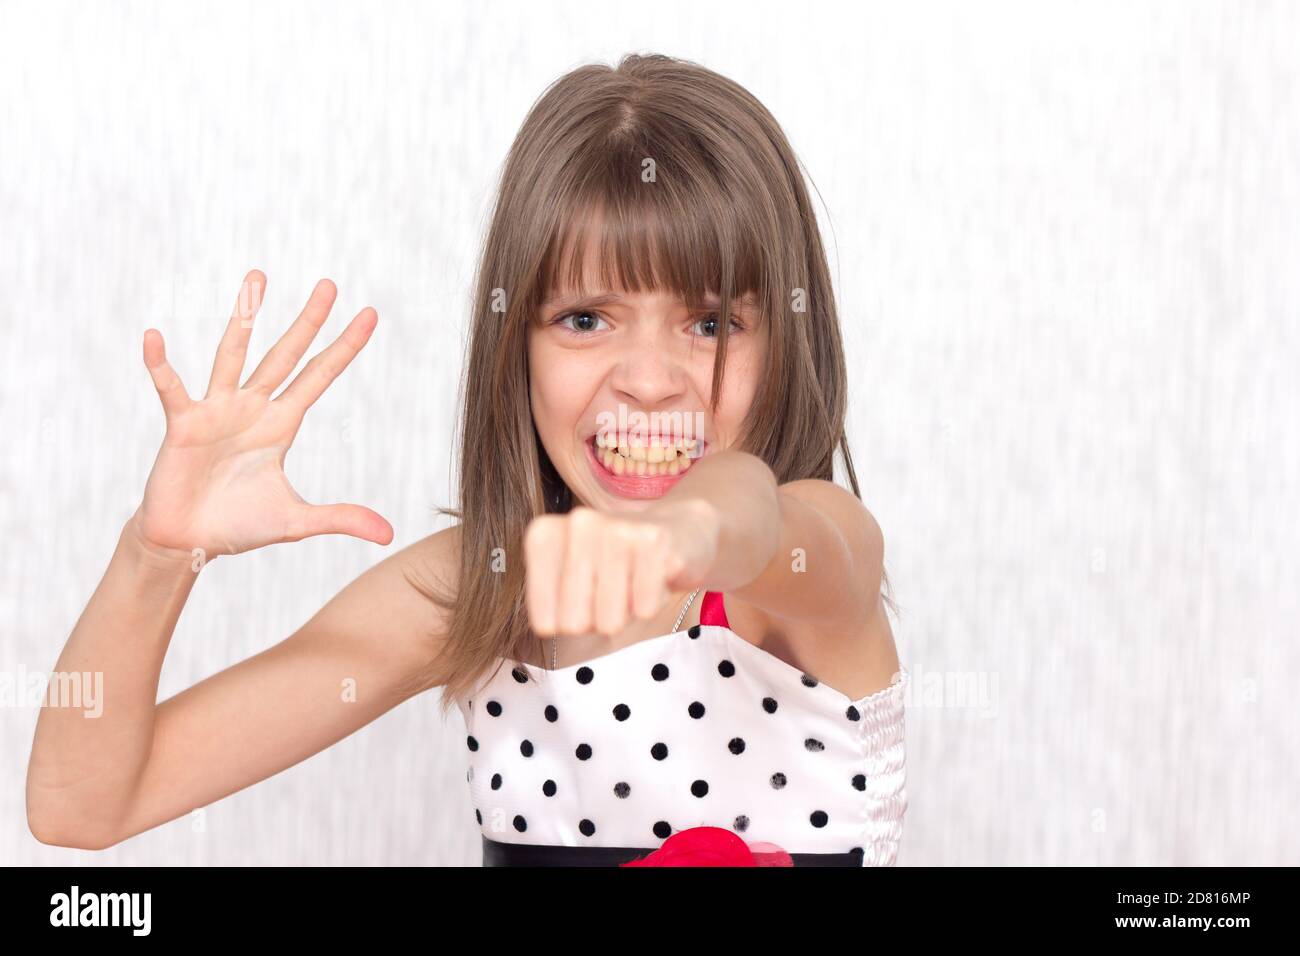 Angry Girl And Emotional Girl Clenched Her Hand Into A Fist Isolated On